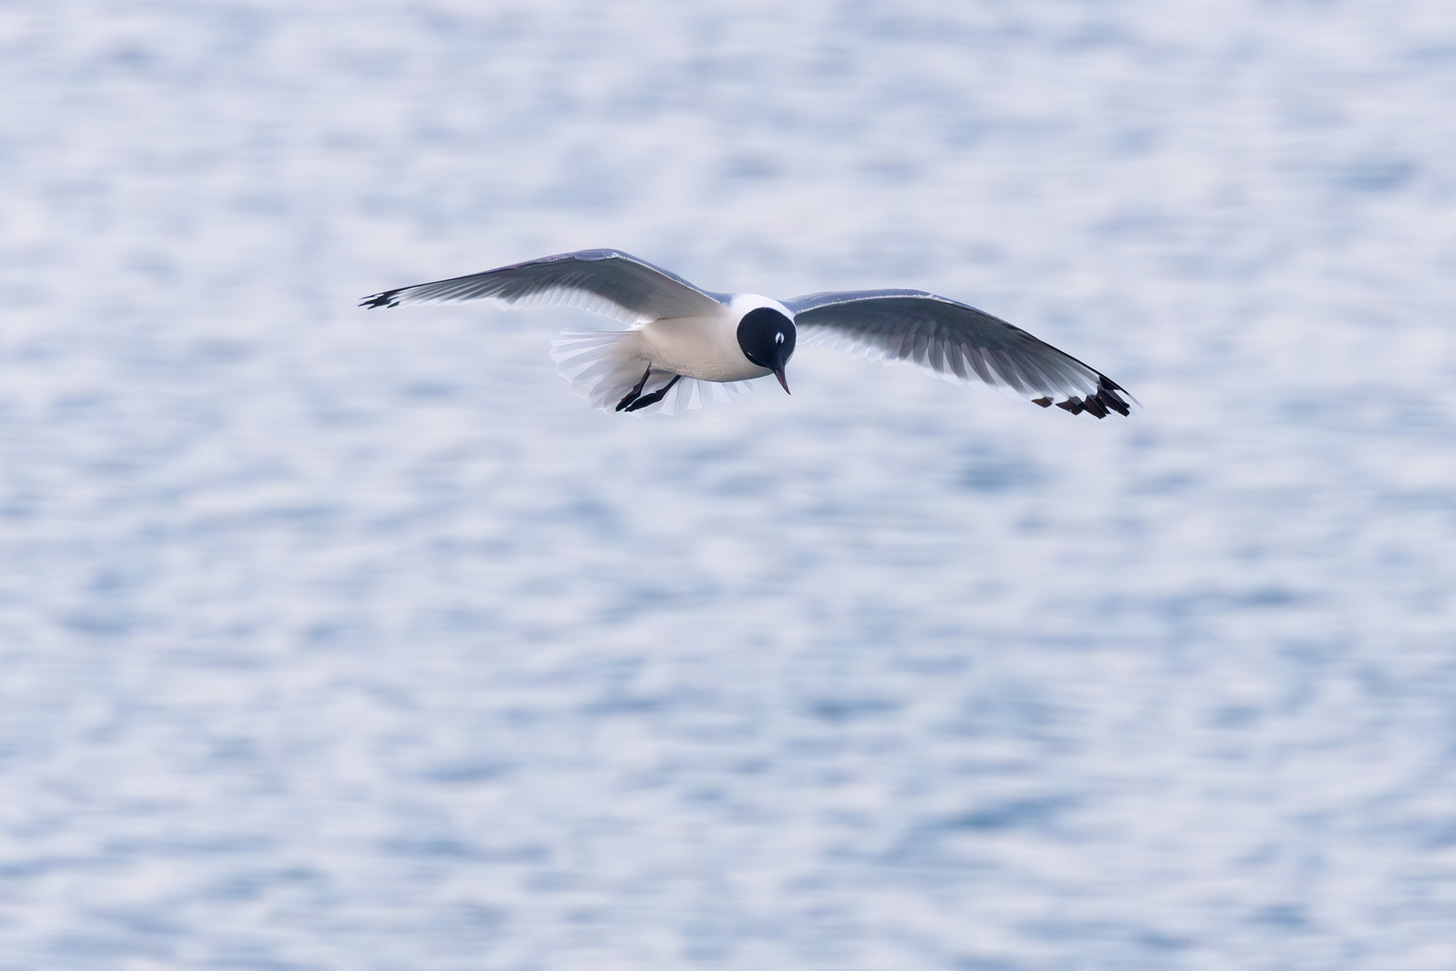 a seagull with a black head and thick white eye arks flying toward the viewer with its wings outstretched. its wings are pale underneat with a light crescent and dark tip. its belly is pinkish. the background is the surface of a lake.